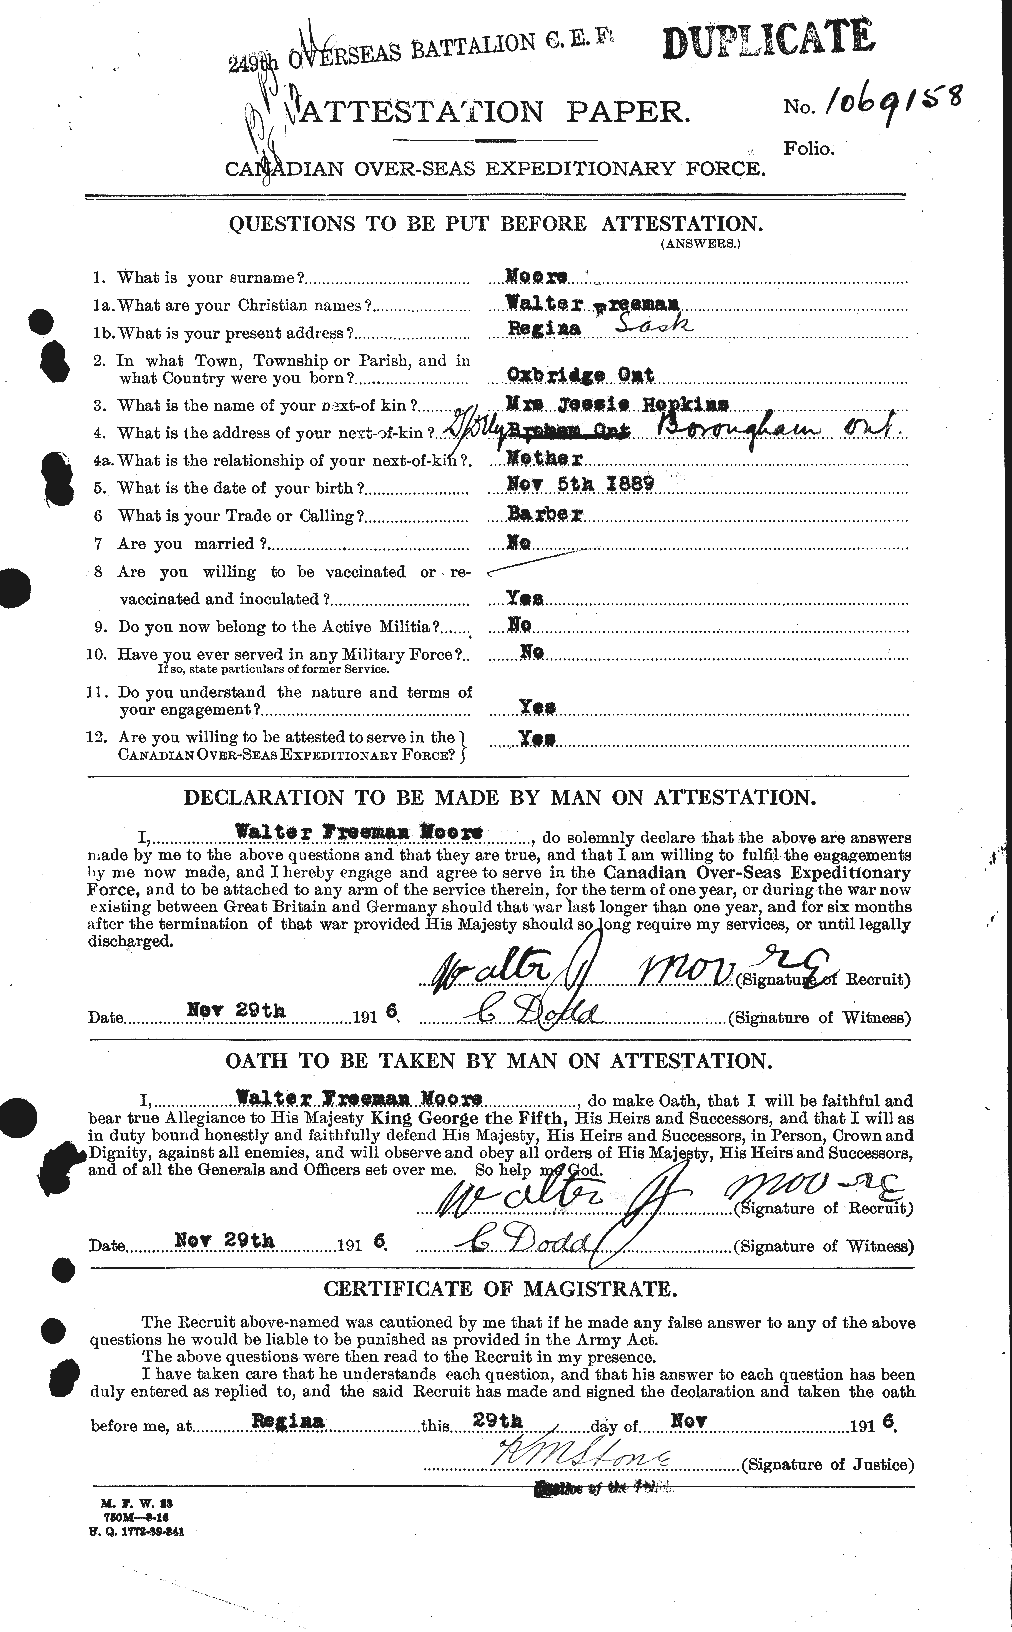 Personnel Records of the First World War - CEF 505707a